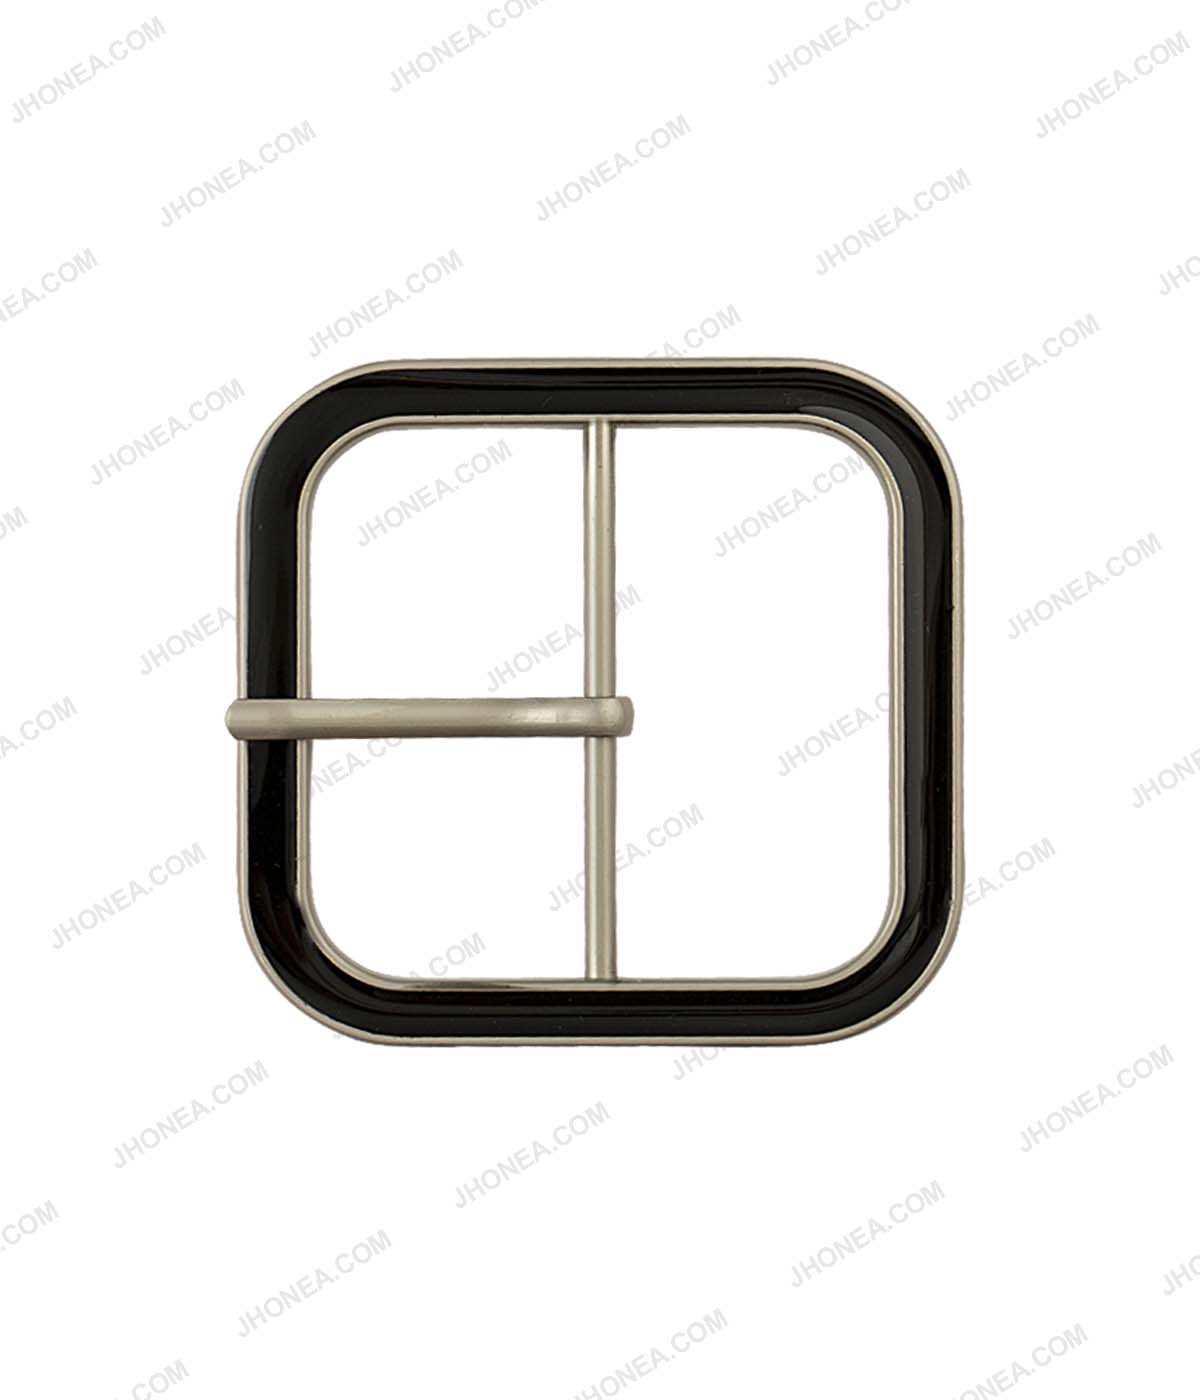 Shiny Glossy Matte Silver with Black Enamel Square Shape Belt Buckle with Prong